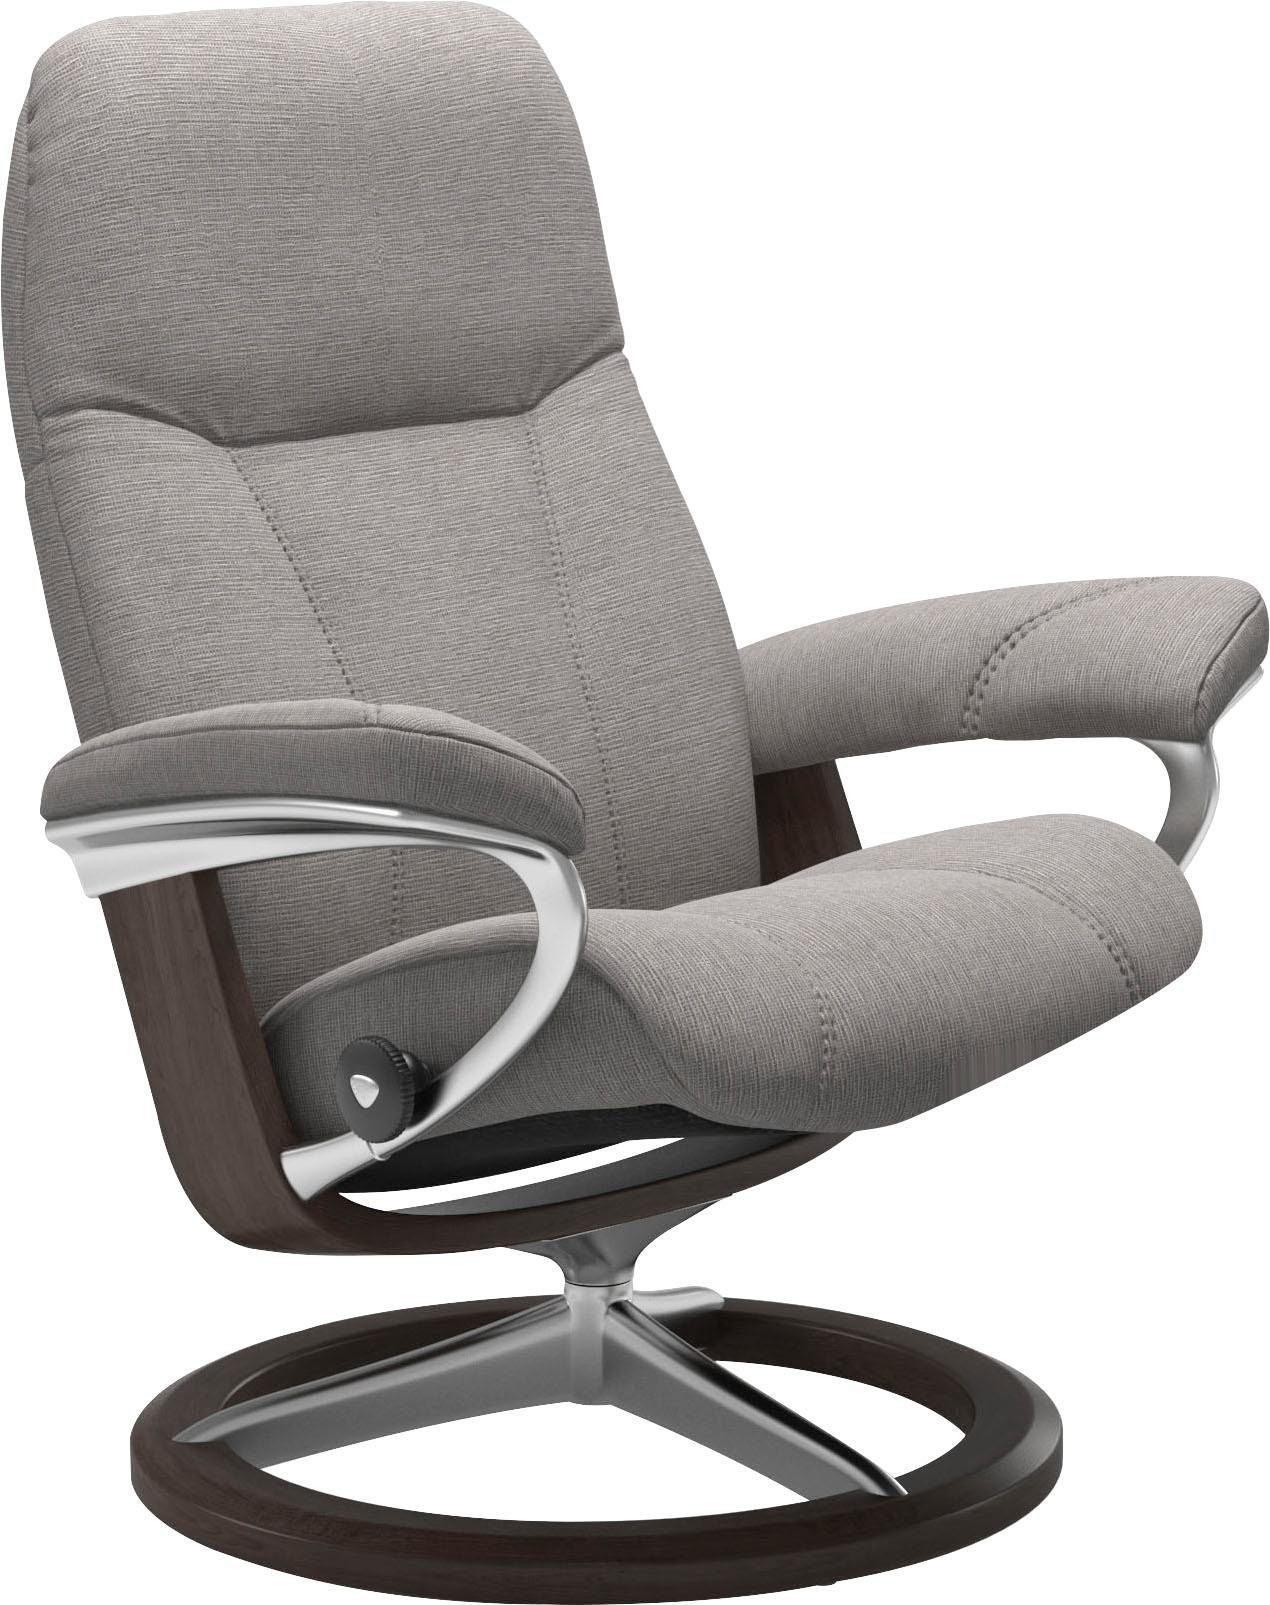 Wenge mit Consul, Größe Gestell Stressless® Base, Signature Relaxsessel L,